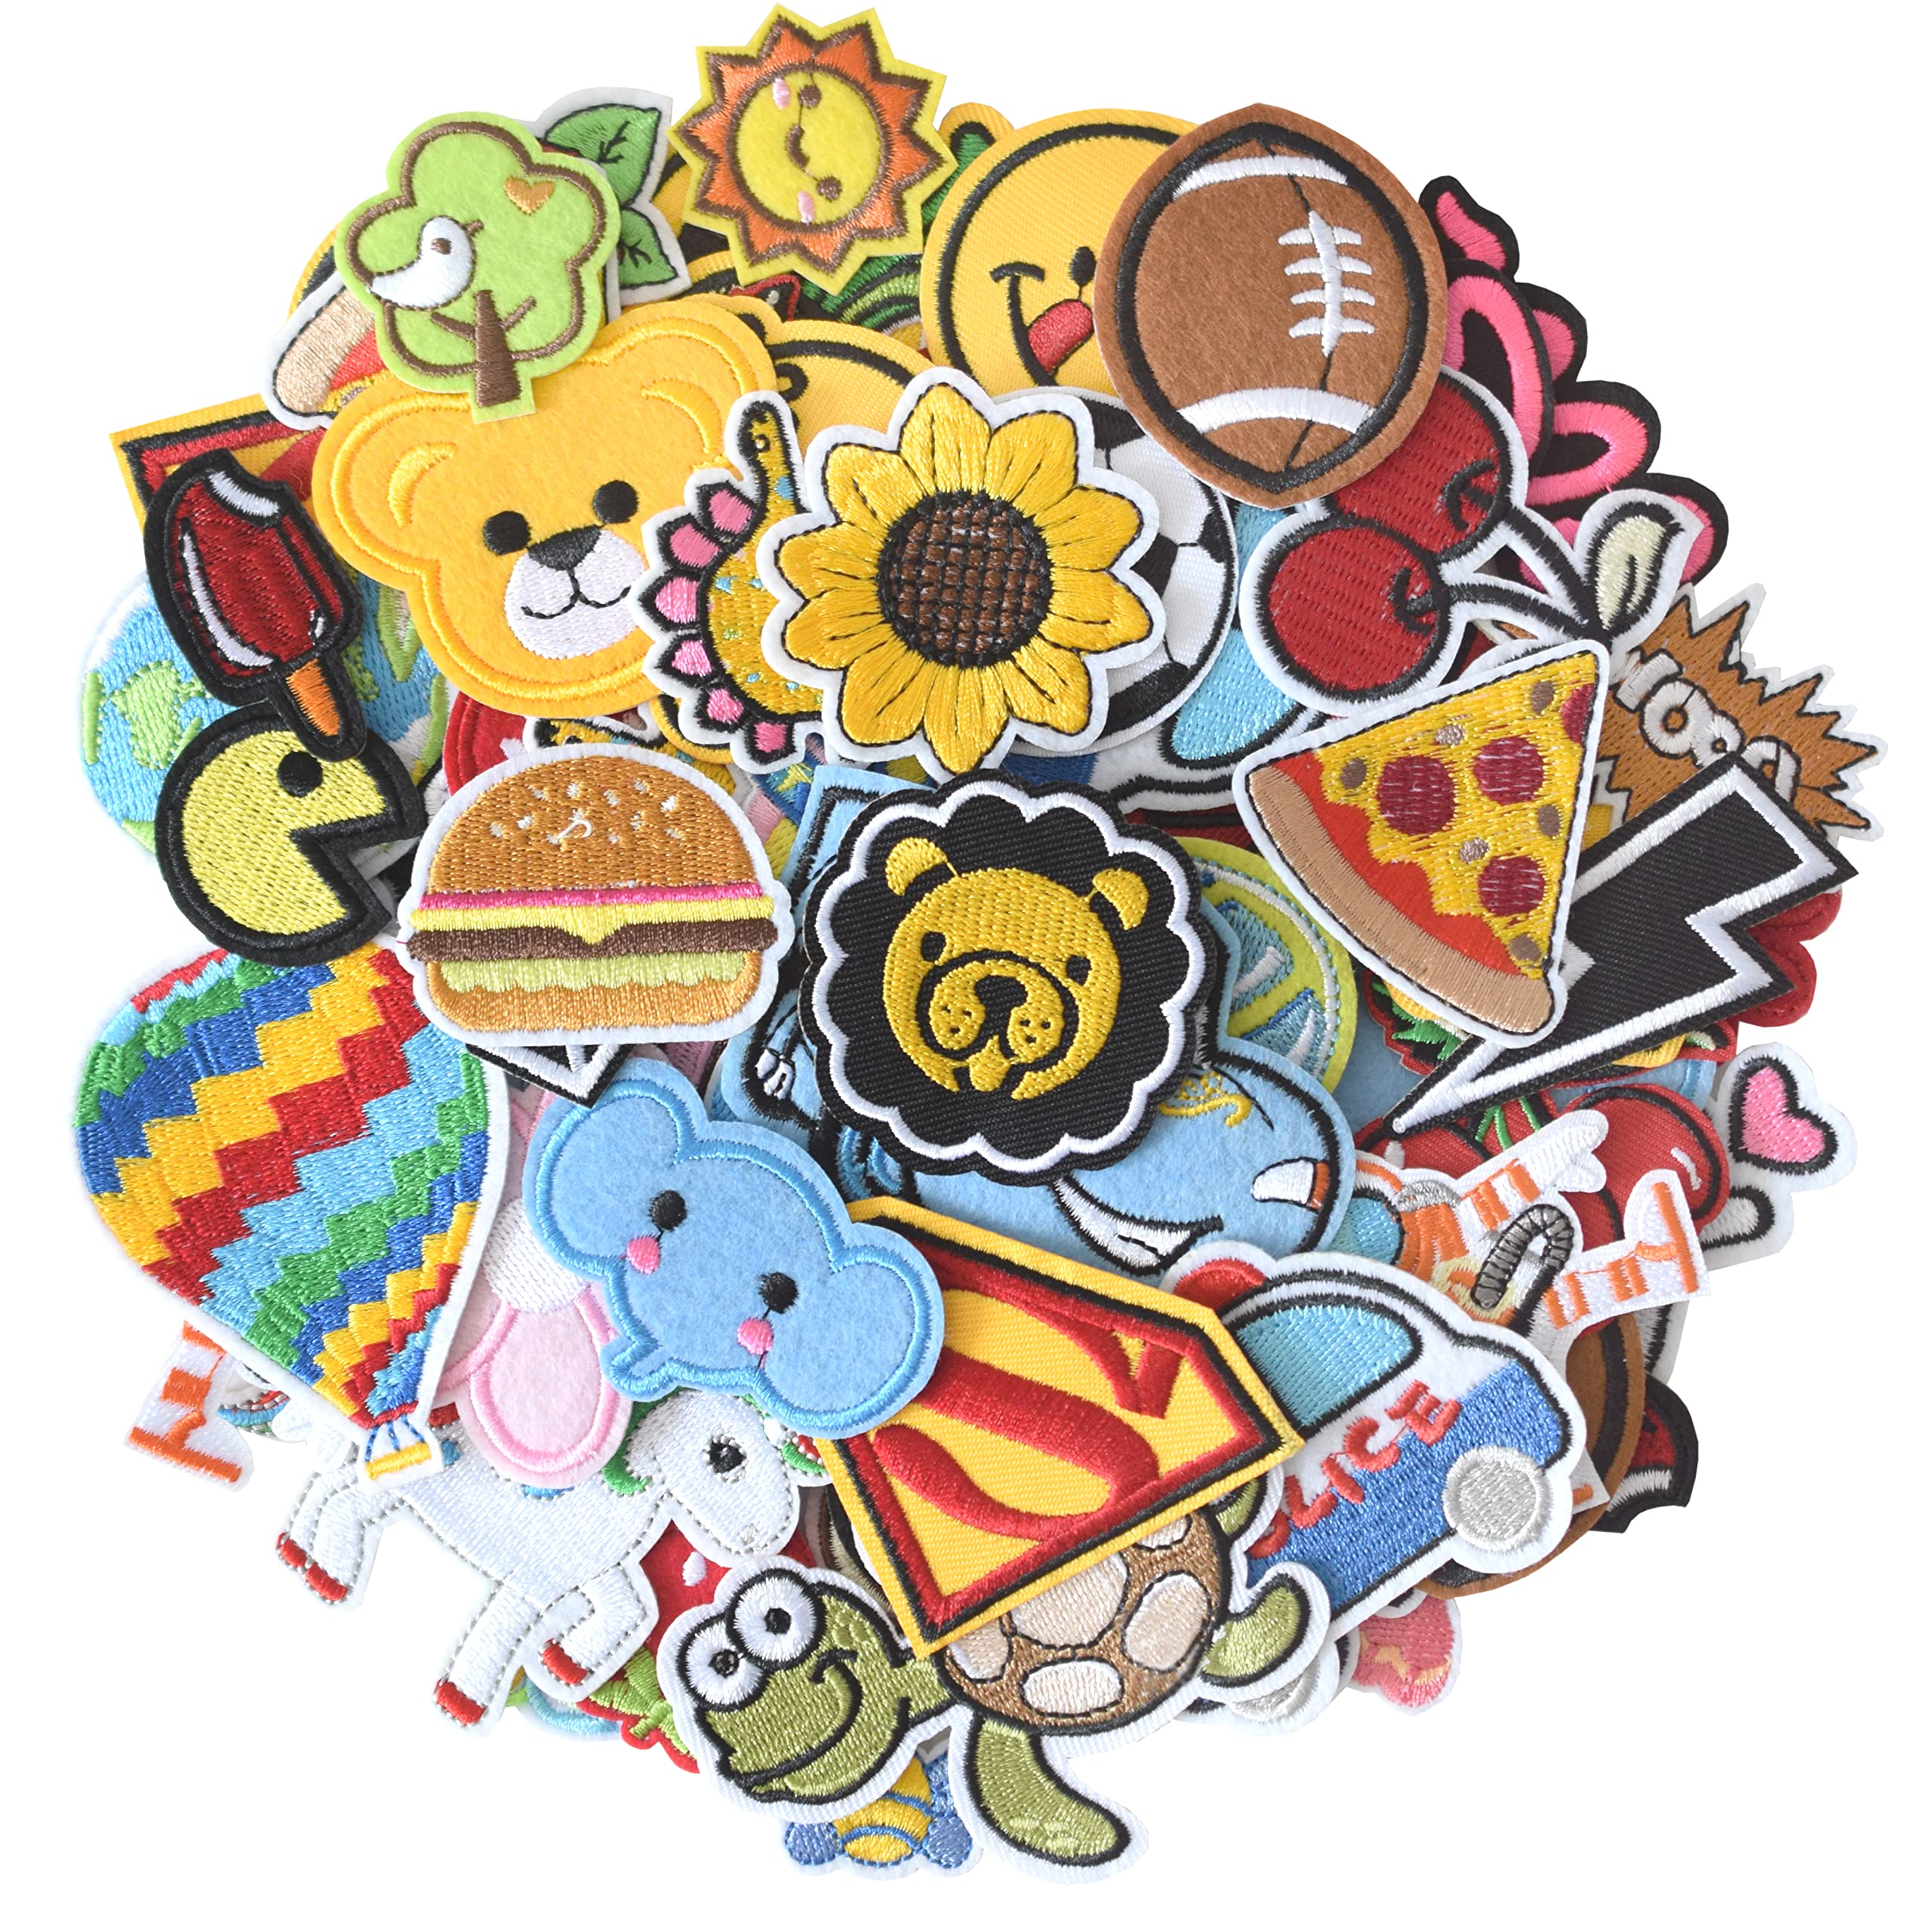 9 Pcs Round Patches Badge Elements Pattern Embroidery Applique DIY Ironing  Sticker for Jackets Jeans Bags Clothing Arts Crafts (Mixed Style) 